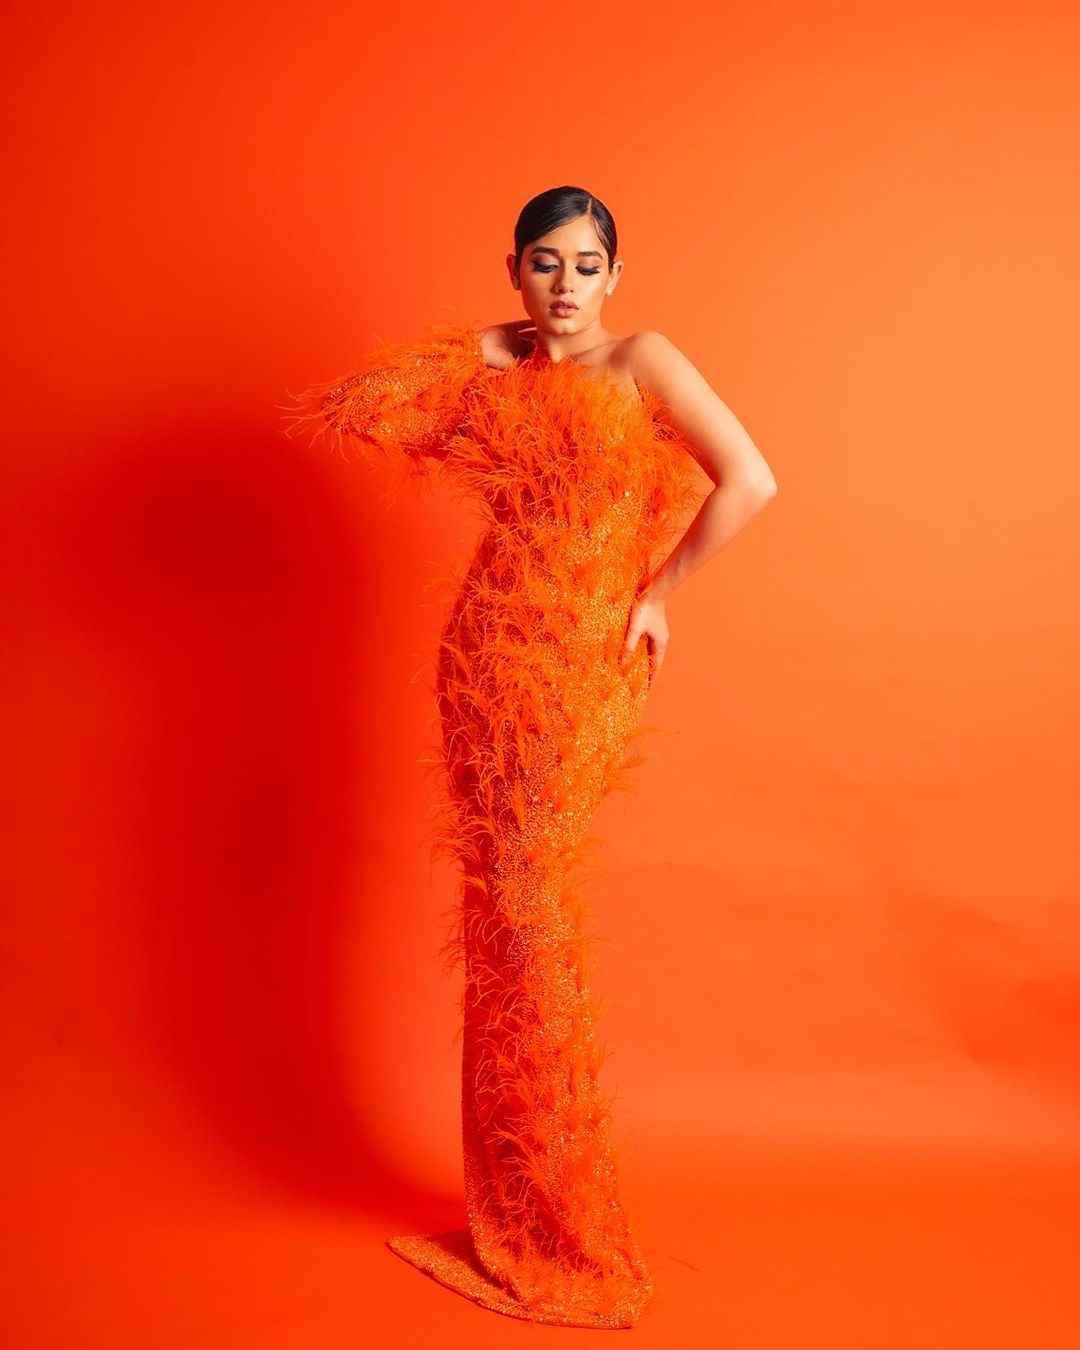 Jannat Zubair Rahmani Instagram download. Jannat Zubair Rahmani hot photos and videos. Jannat Zubair Rahmani sexy bikini. Jannat Zubair Rahmani is a Pakistani model and actress photoshoot for photographer Anish Ajmera. here she is in an orange long bodycon feather dress.